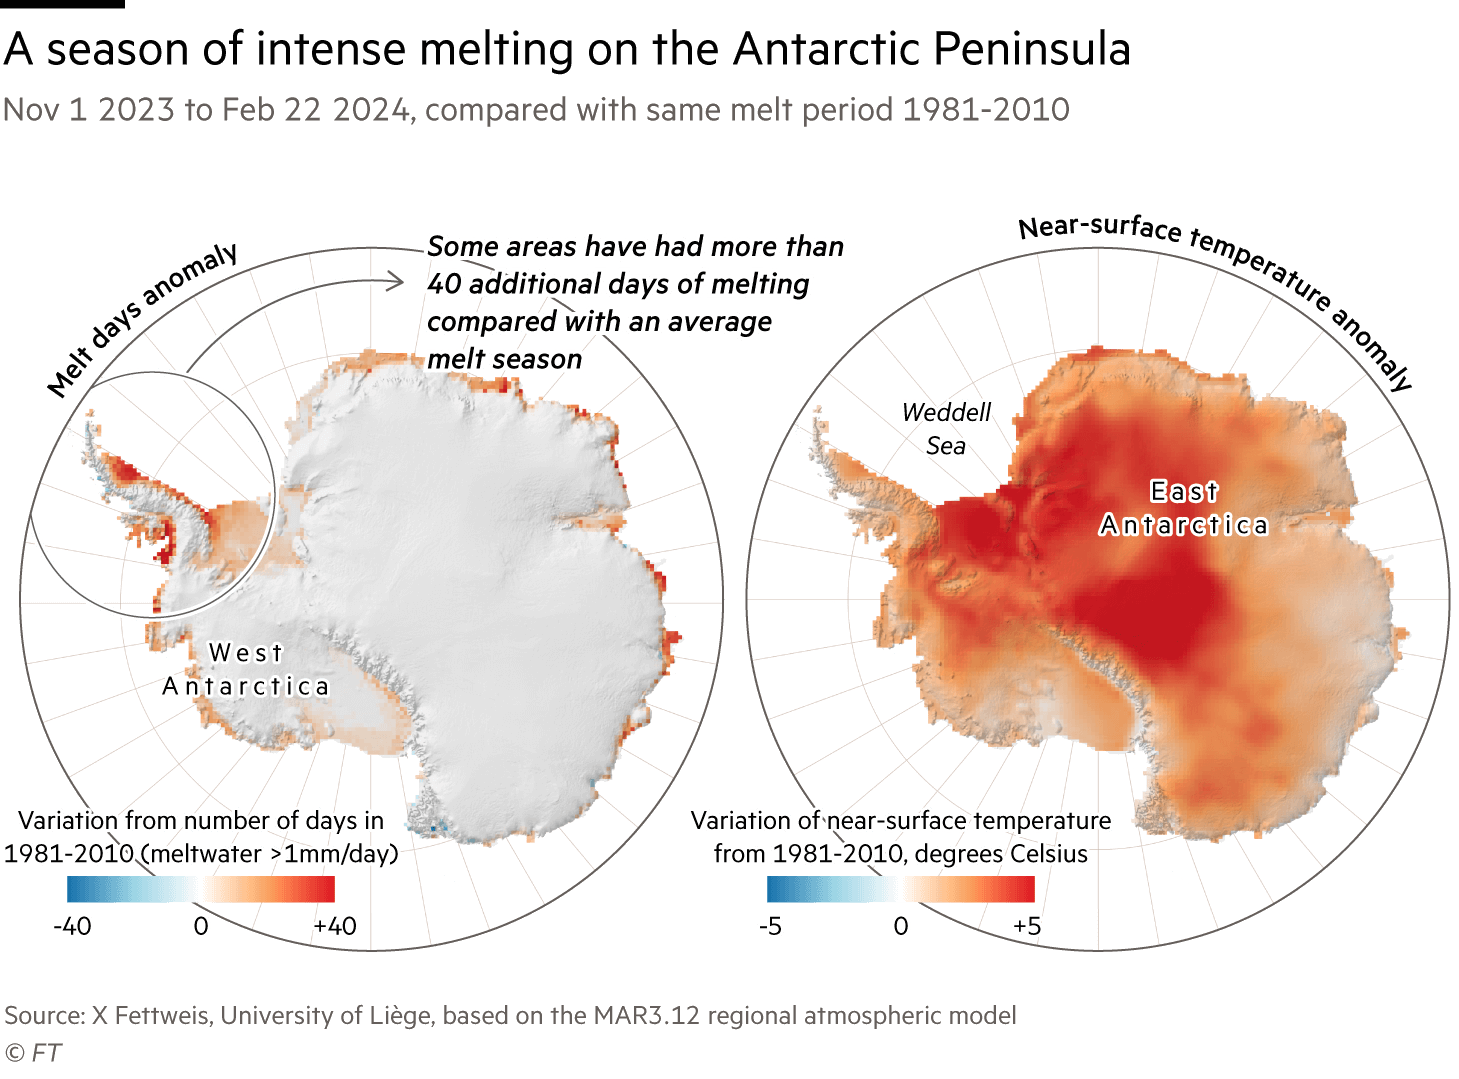 Maps showing this season's number of melt days in Antartica compared with the long-term average. Particulary the Antarctic Peninsula has had more melting. Source: Source: X. Fettweis, University of Liège and MAR3.12